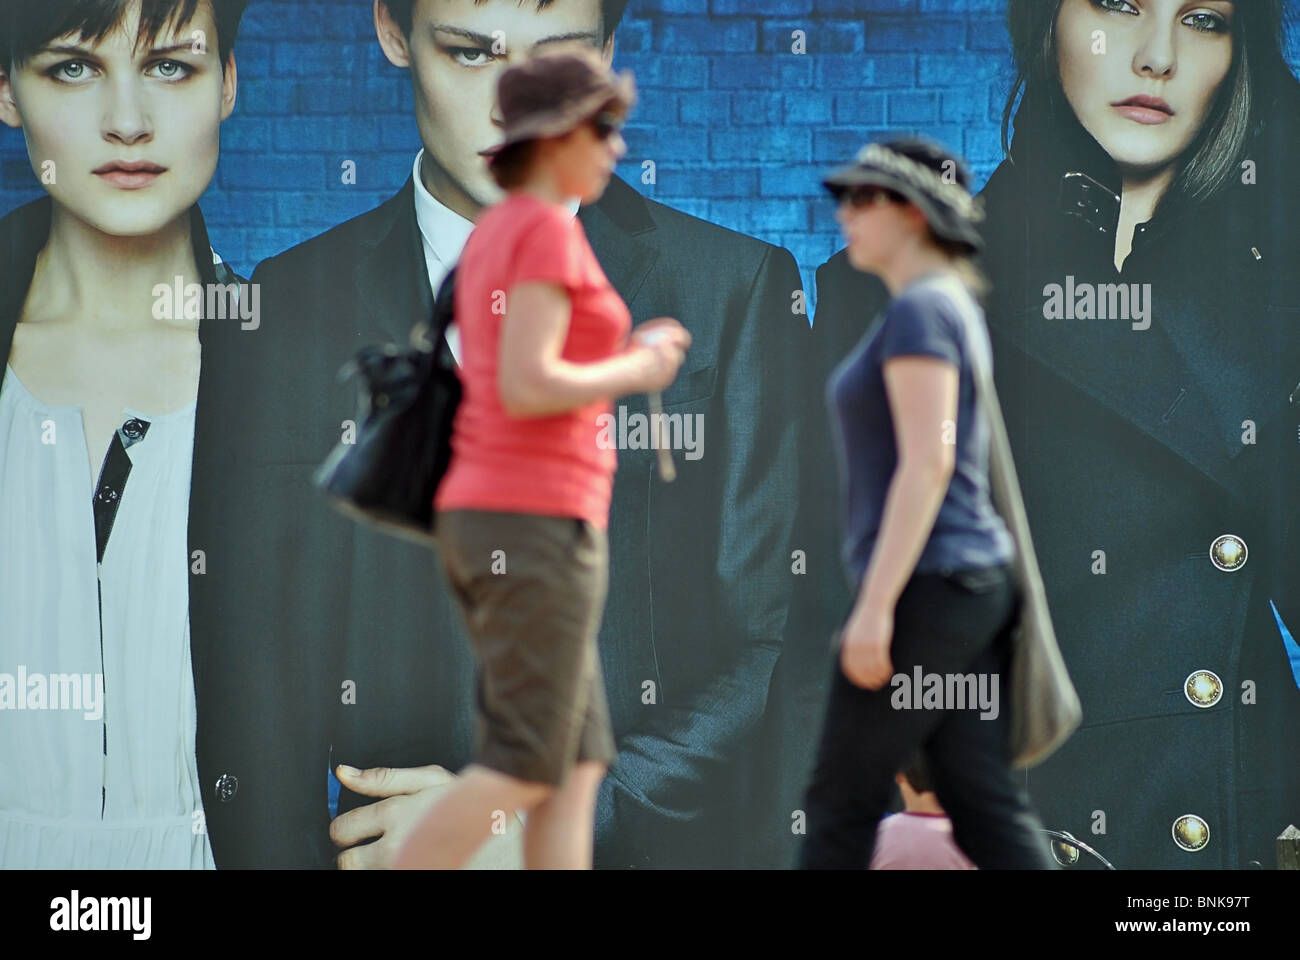 People walk past billboards advertising Burberry clothes, Venice, Italy Stock Photo